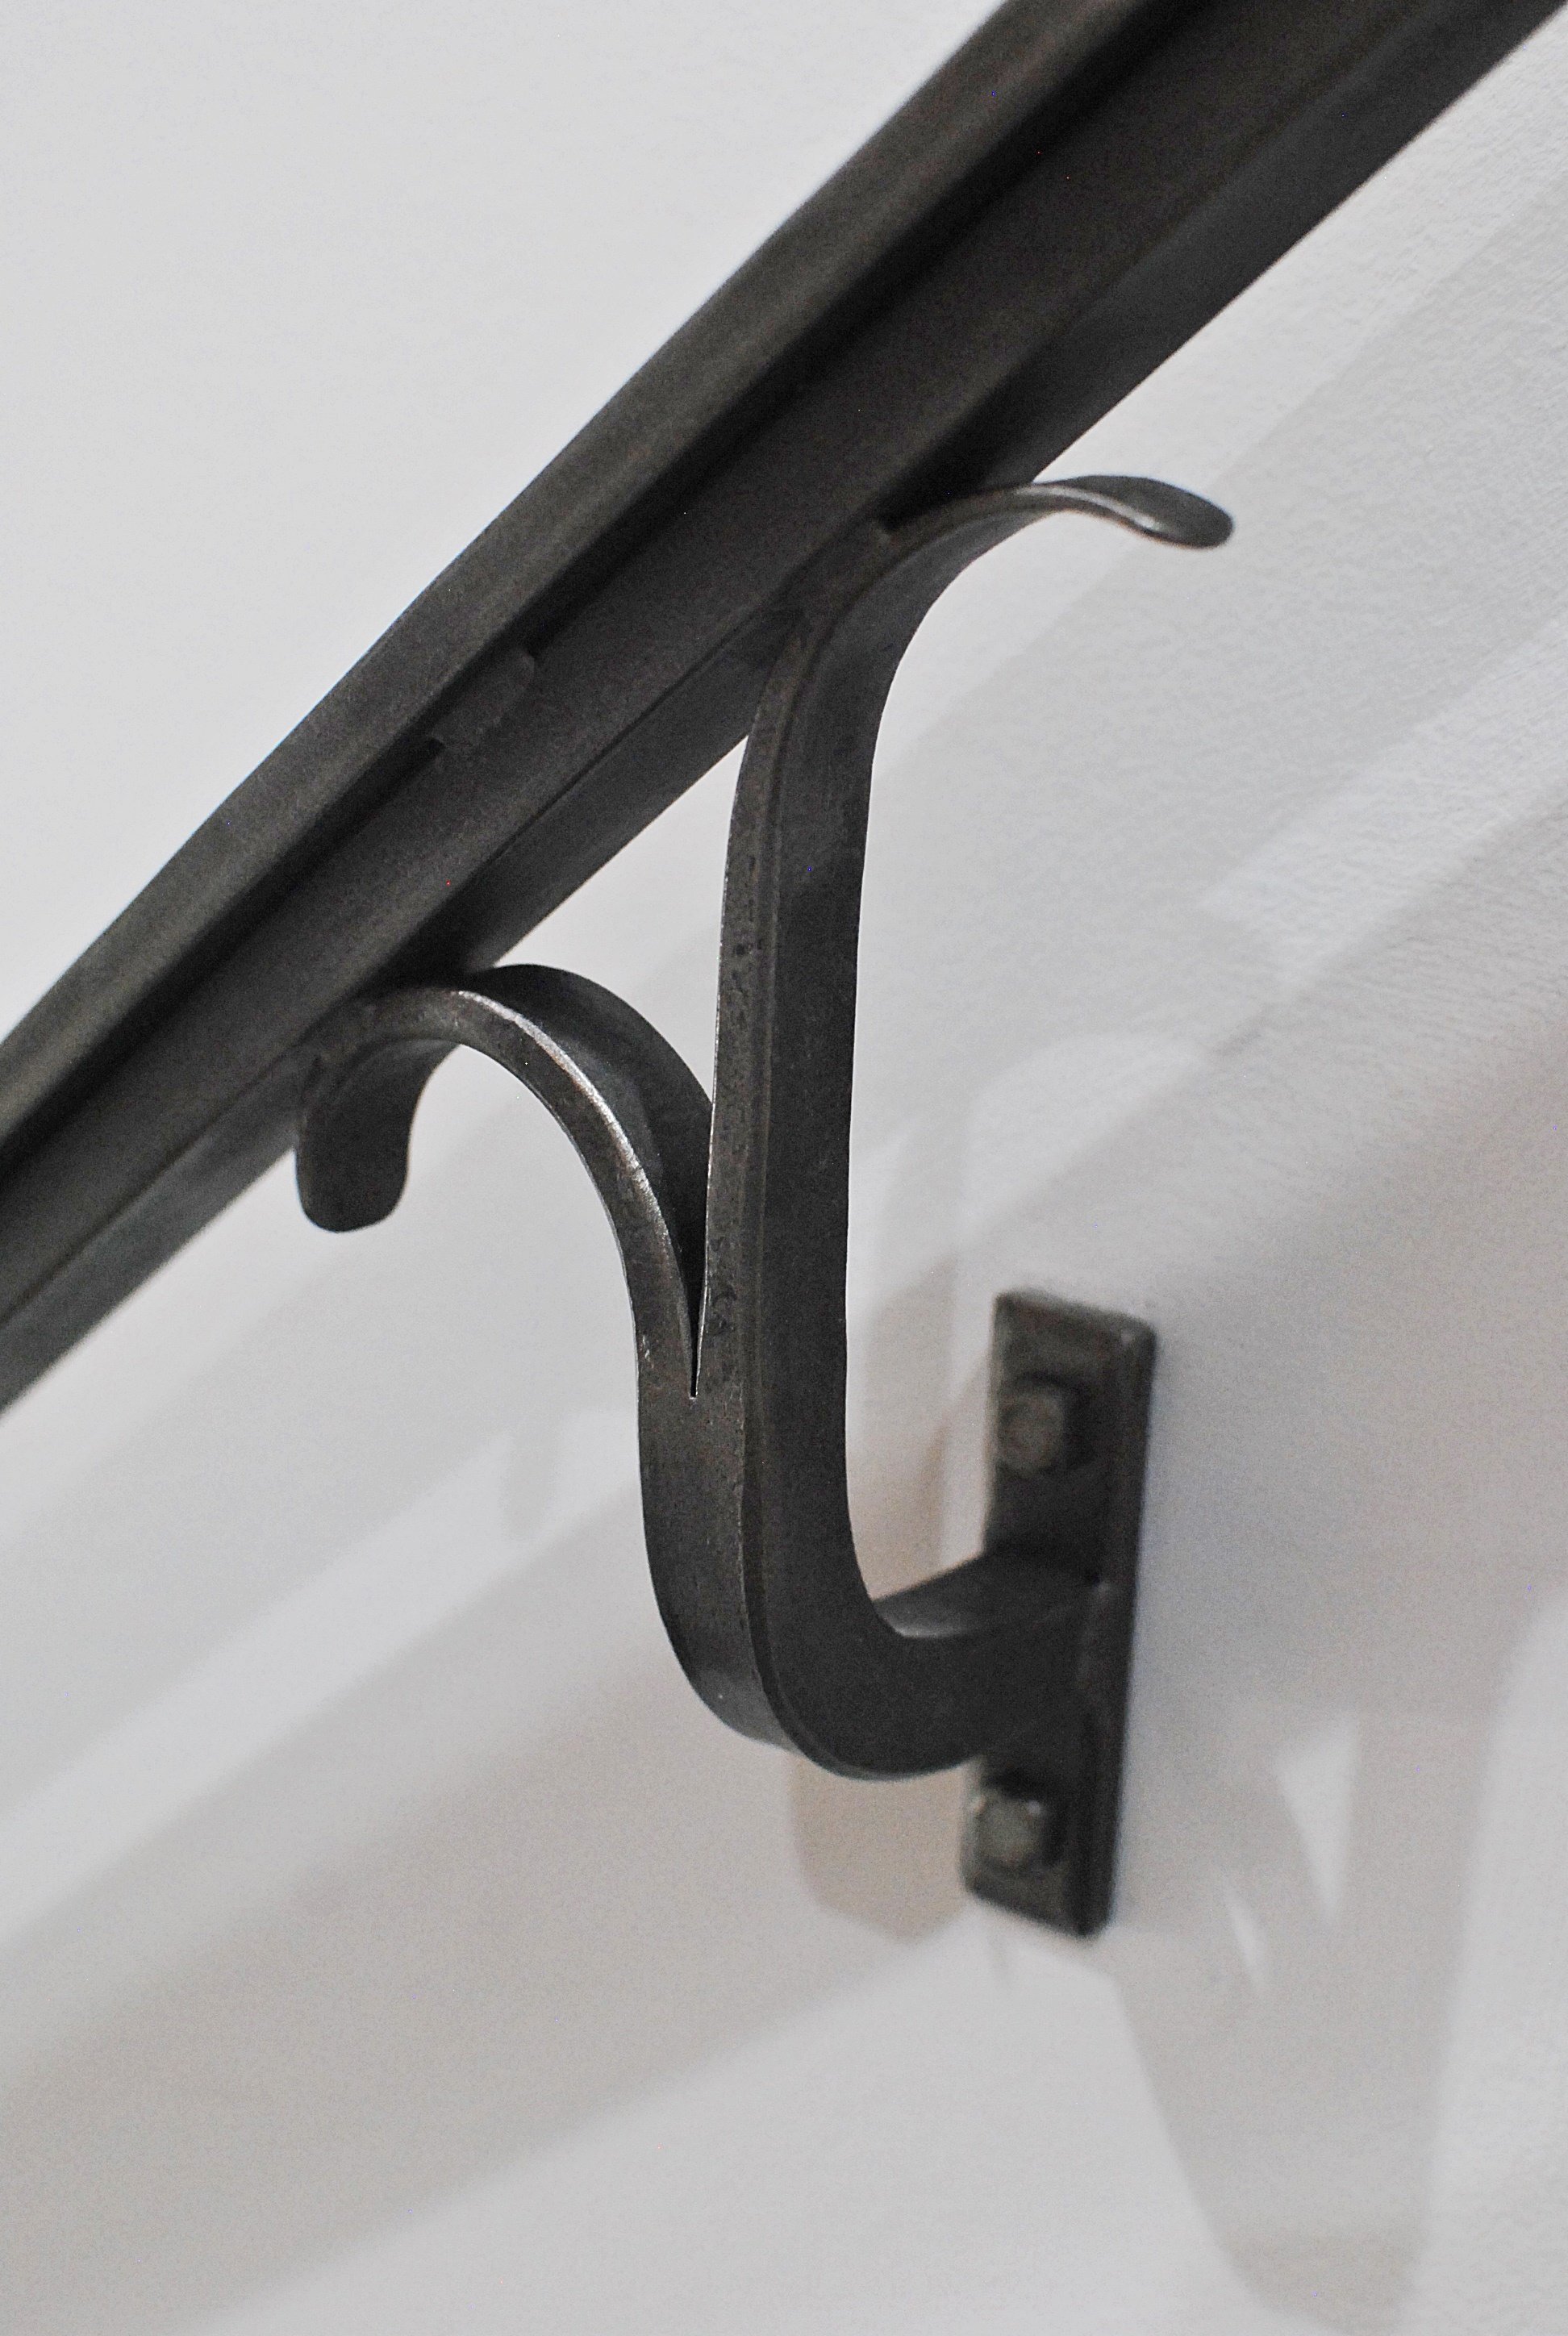 Stair bannister wall bracket detail